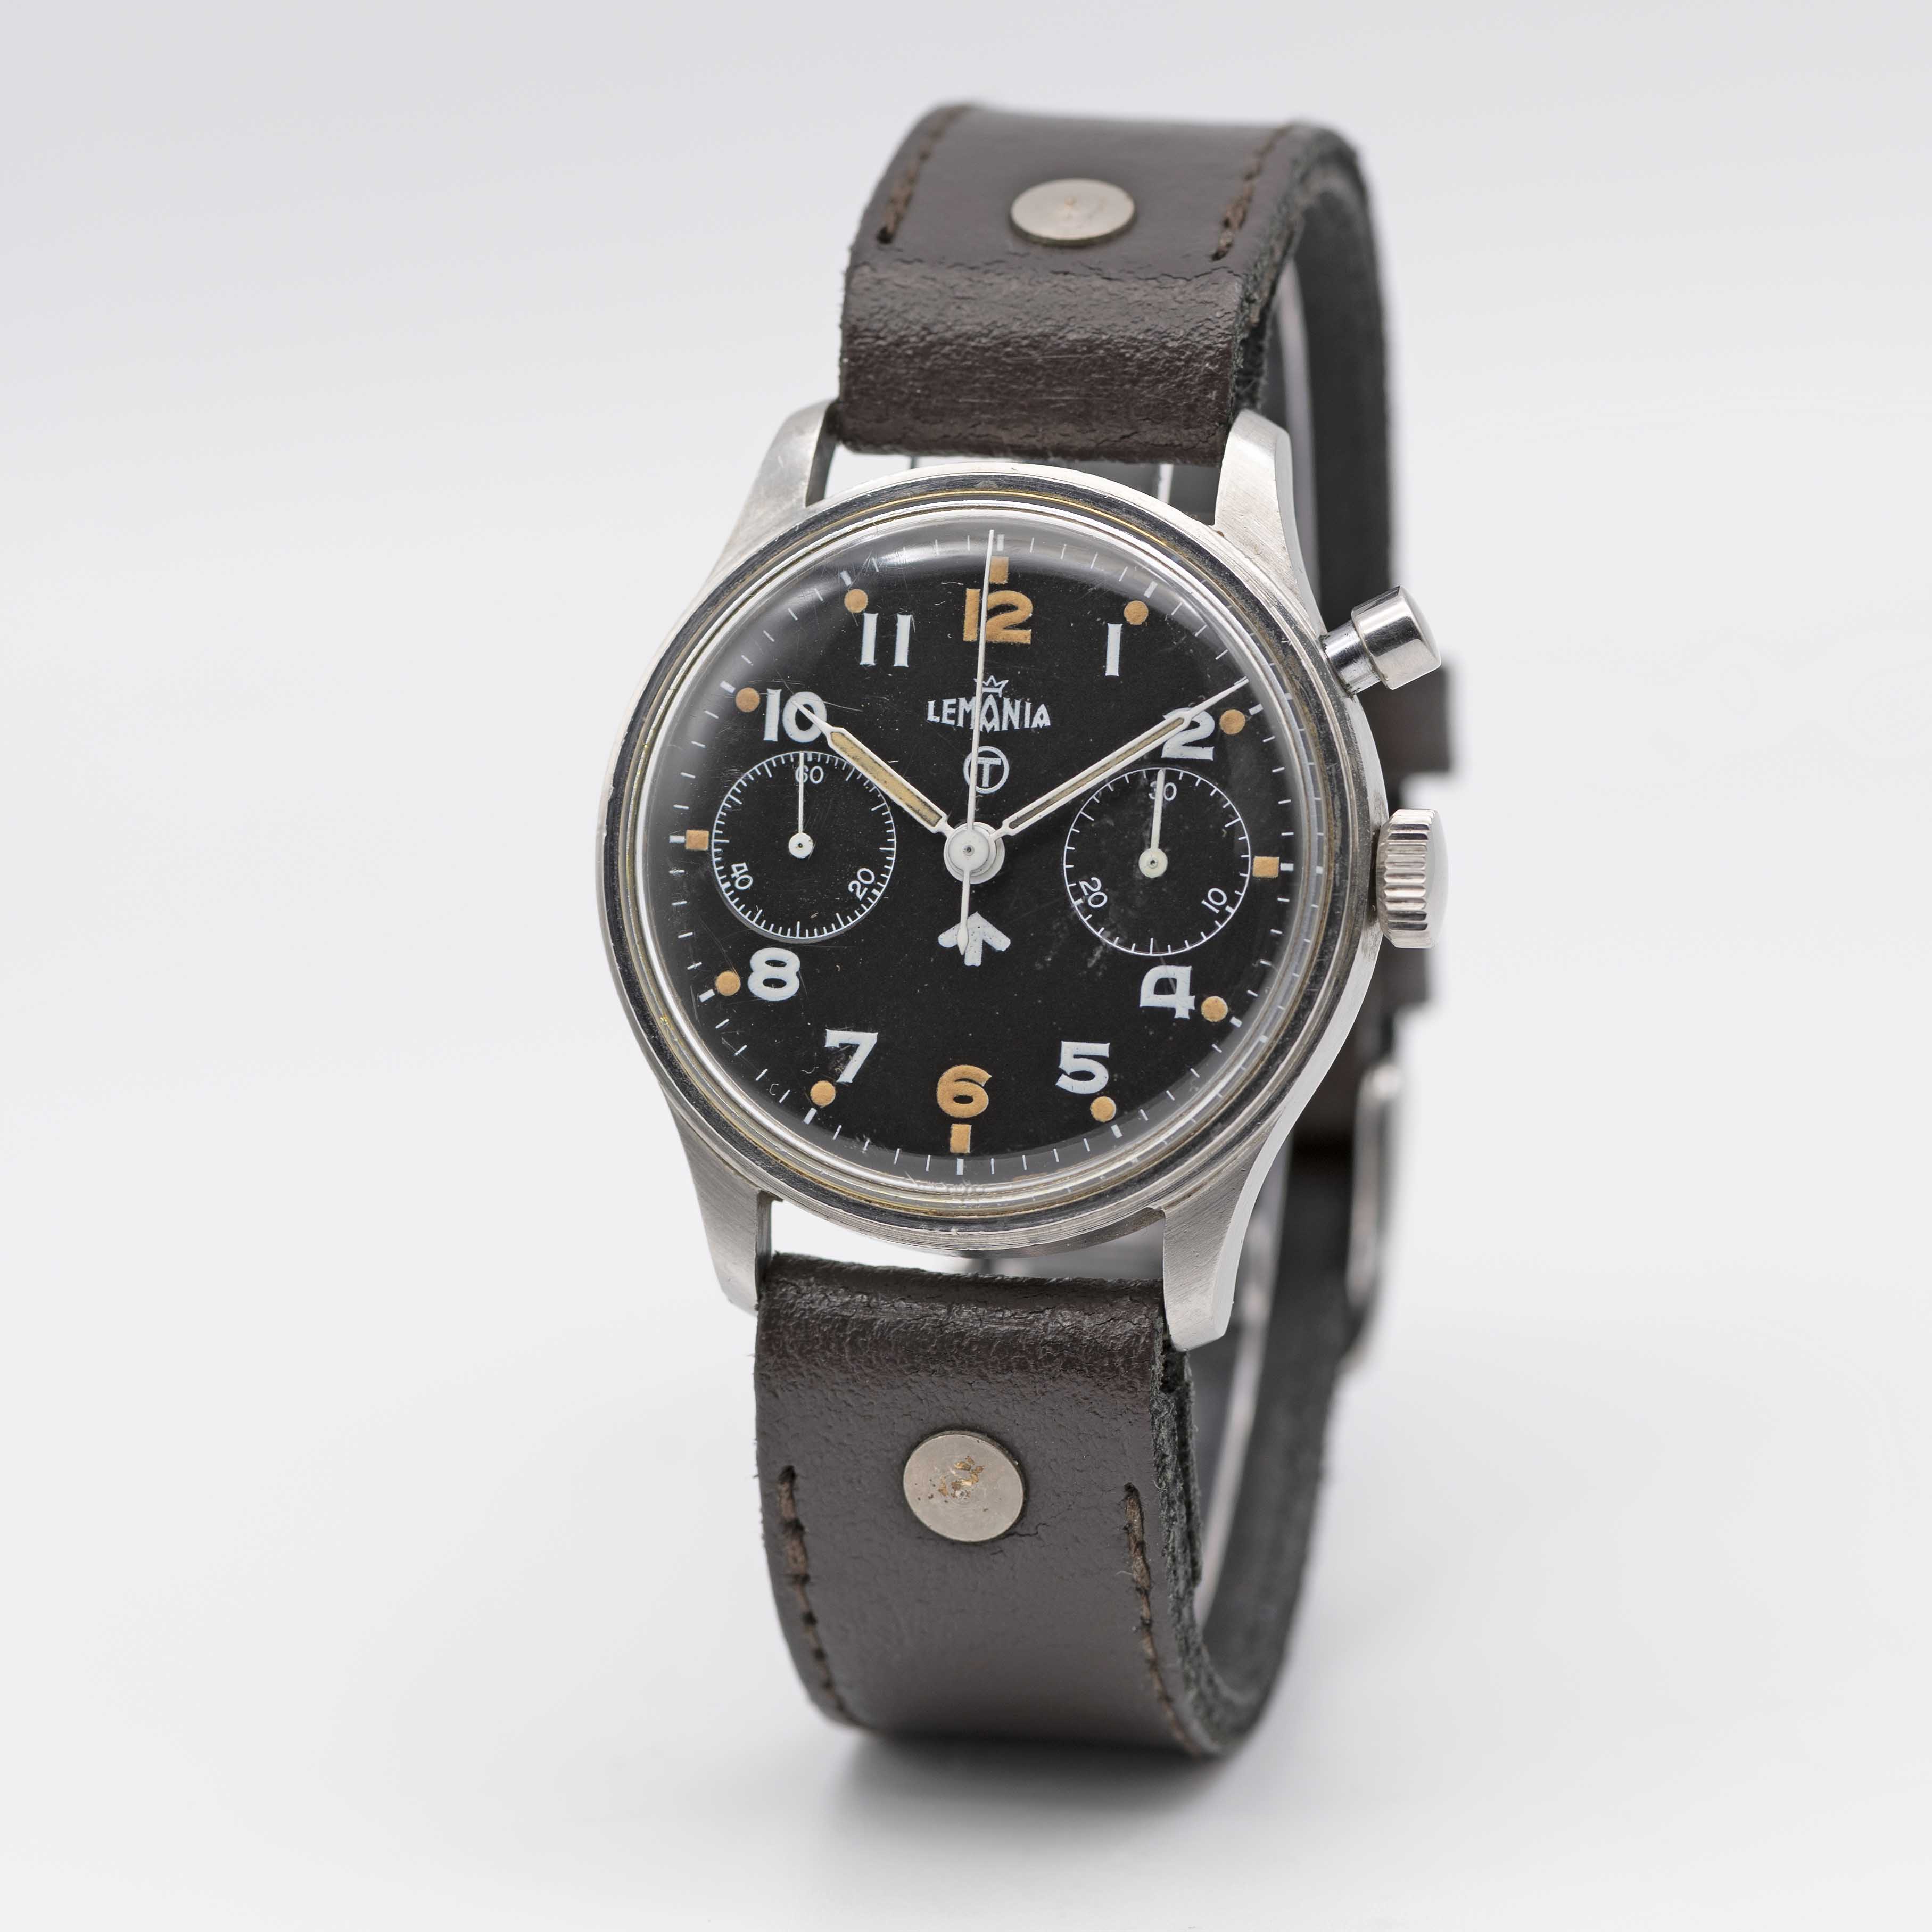 A GENTLEMAN'S STAINLESS STEEL BRITISH MILITARY ROYAL NAVY LEMANIA SINGLE BUTTON CHRONOGRAPH WRIST - Image 3 of 8